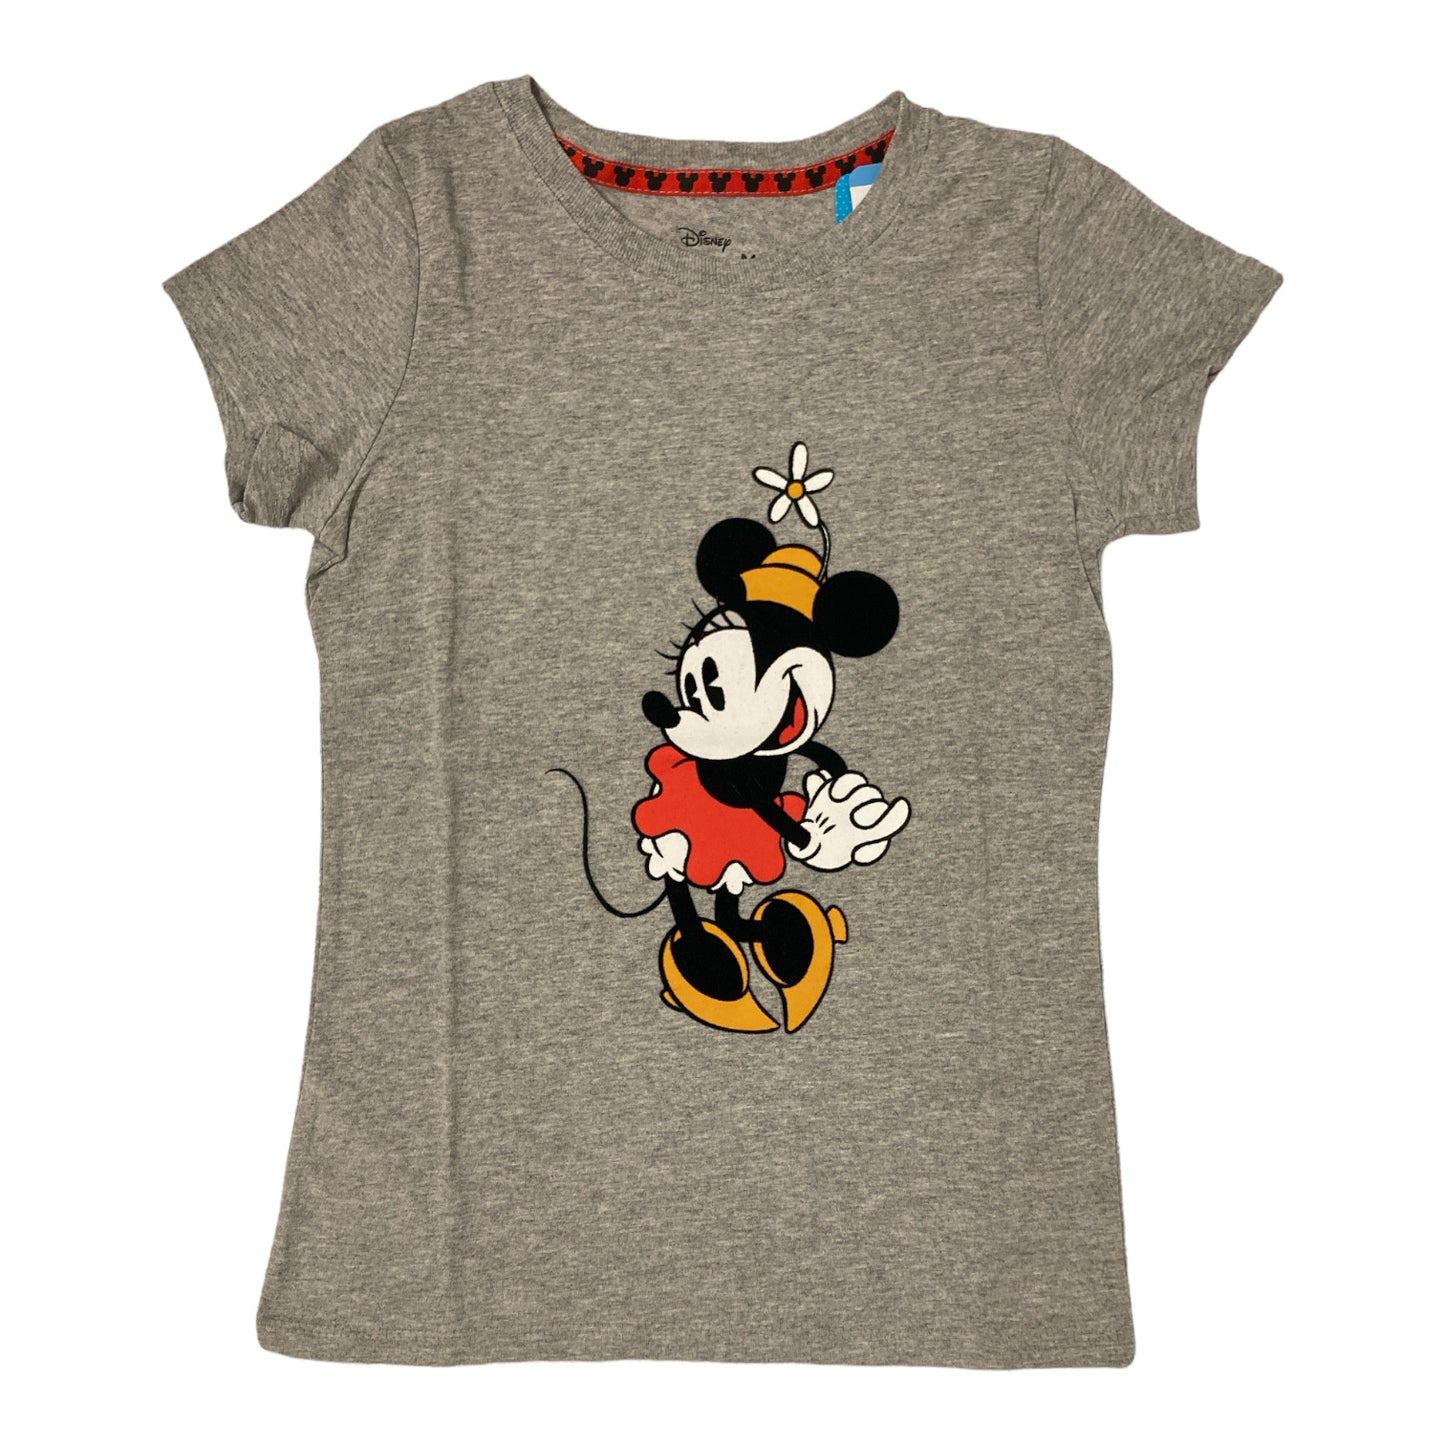 Disney Minnie Mouse Girl's Short Sleeve Graphic T-Shirt